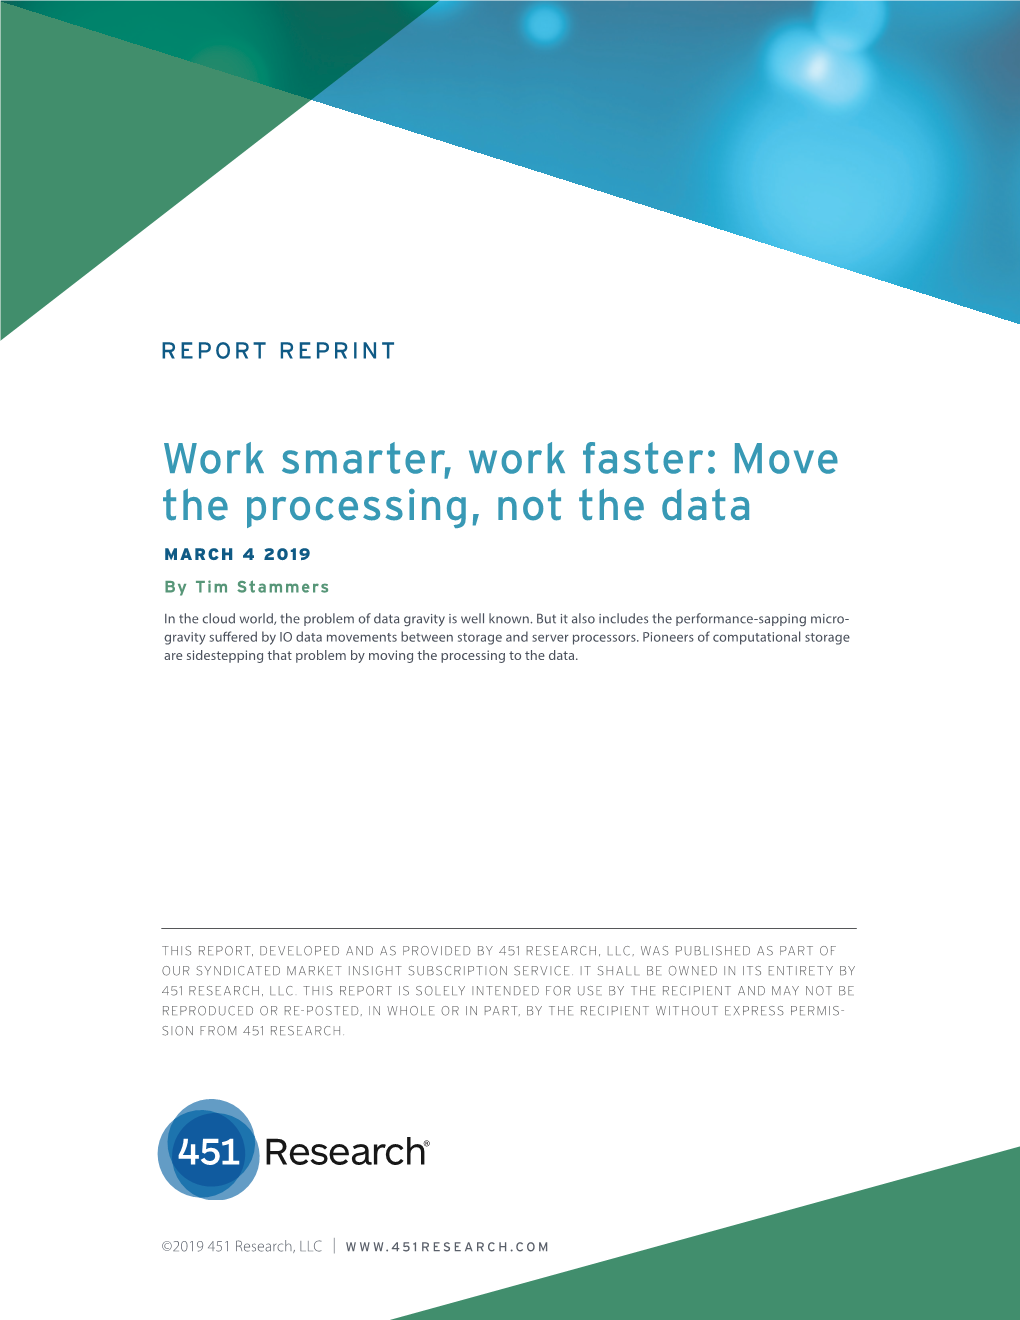 Work Smarter, Work Faster: Move the Processing, Not the Data